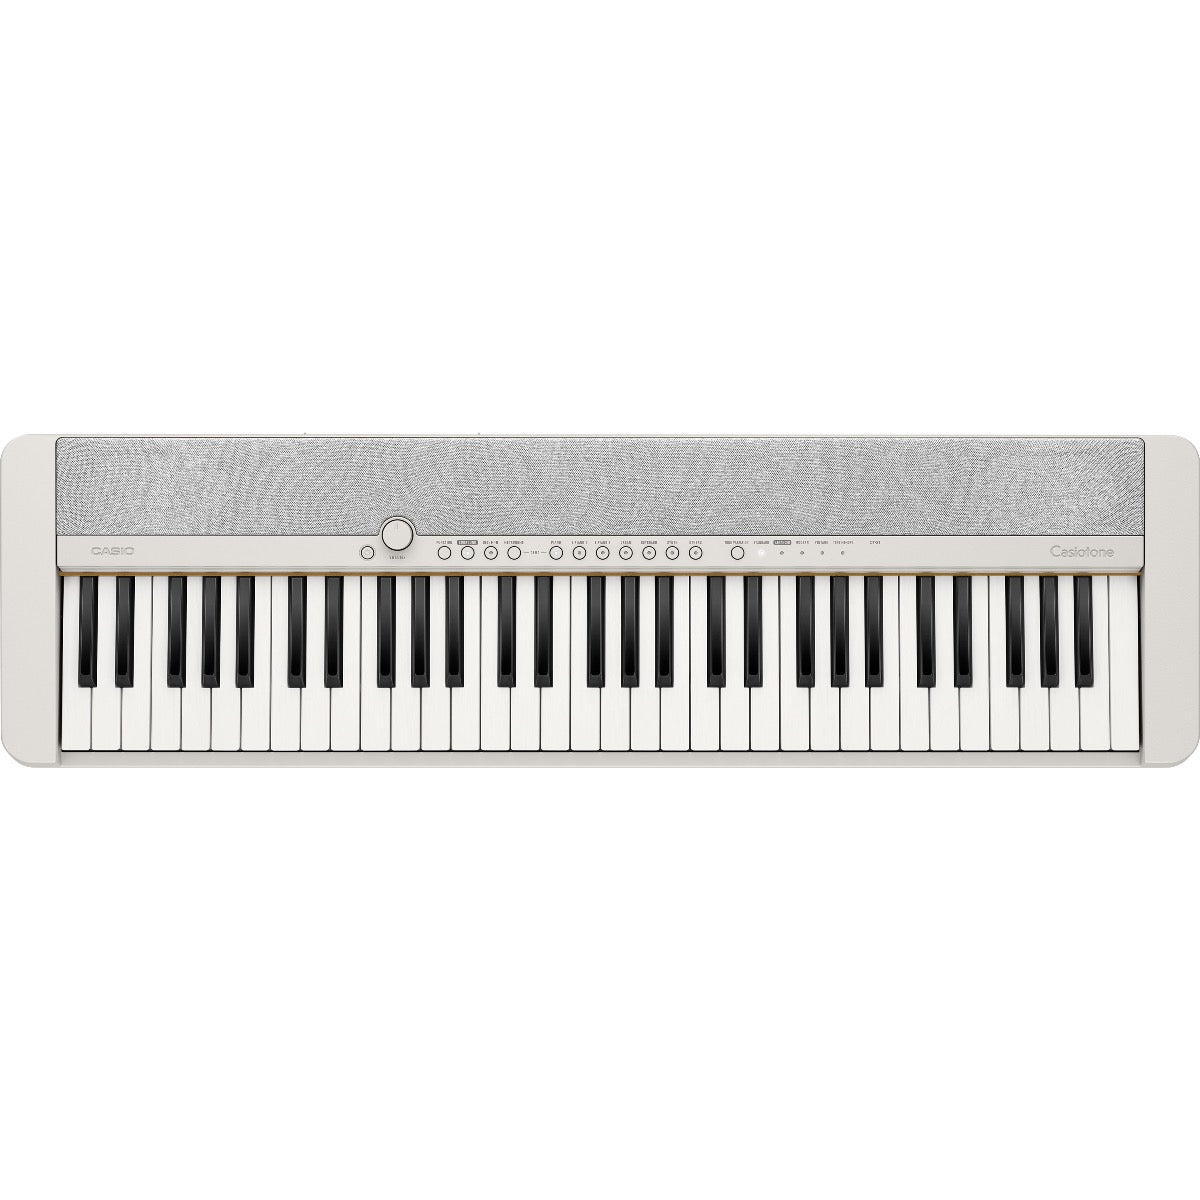 Top view of Casio Casiotone CT-S1 Portable Keyboard - White